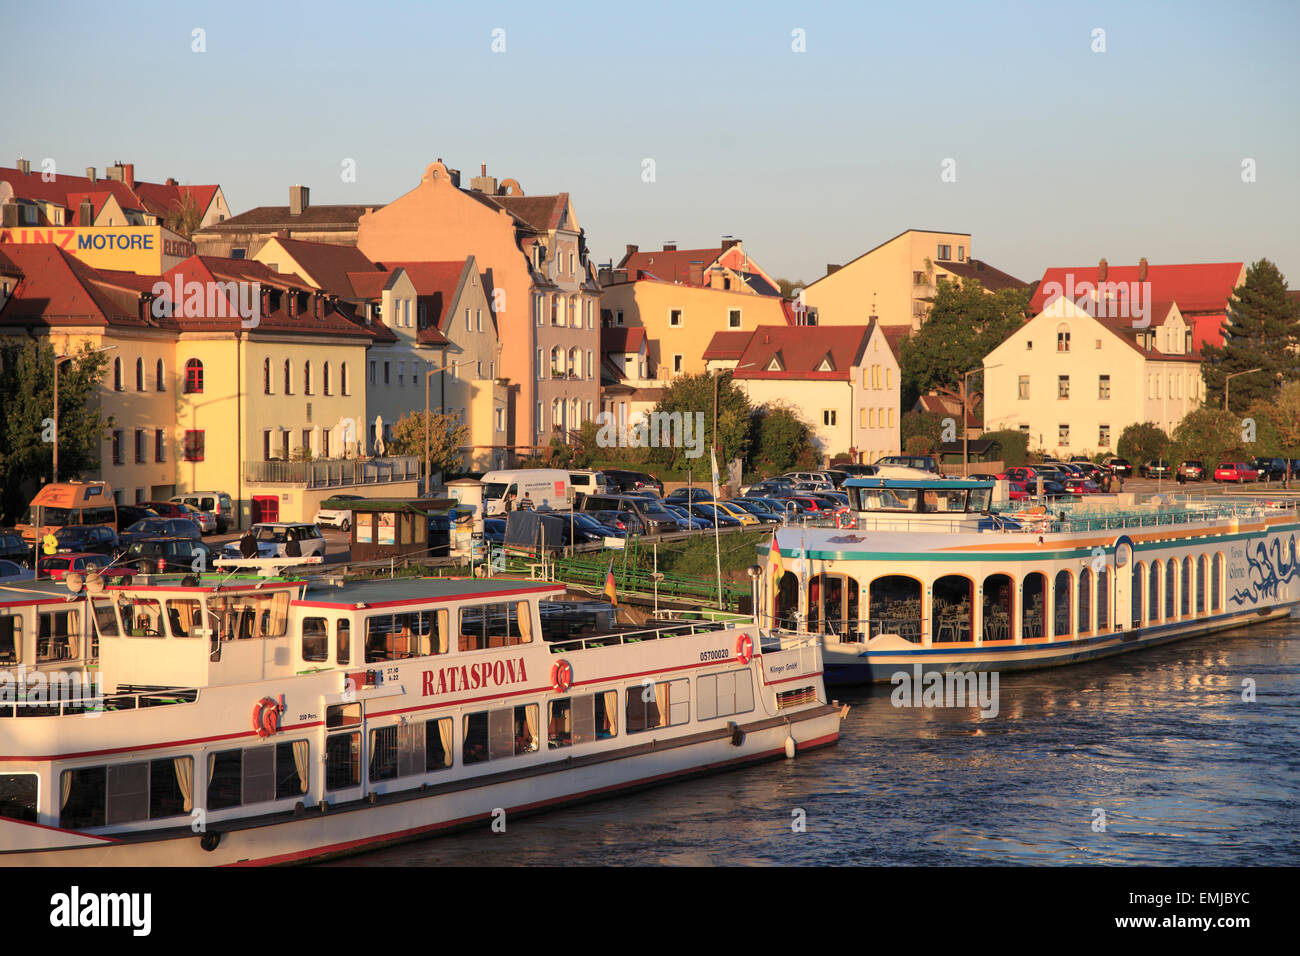 River Ships High Resolution Stock Photography and Images - Alamy